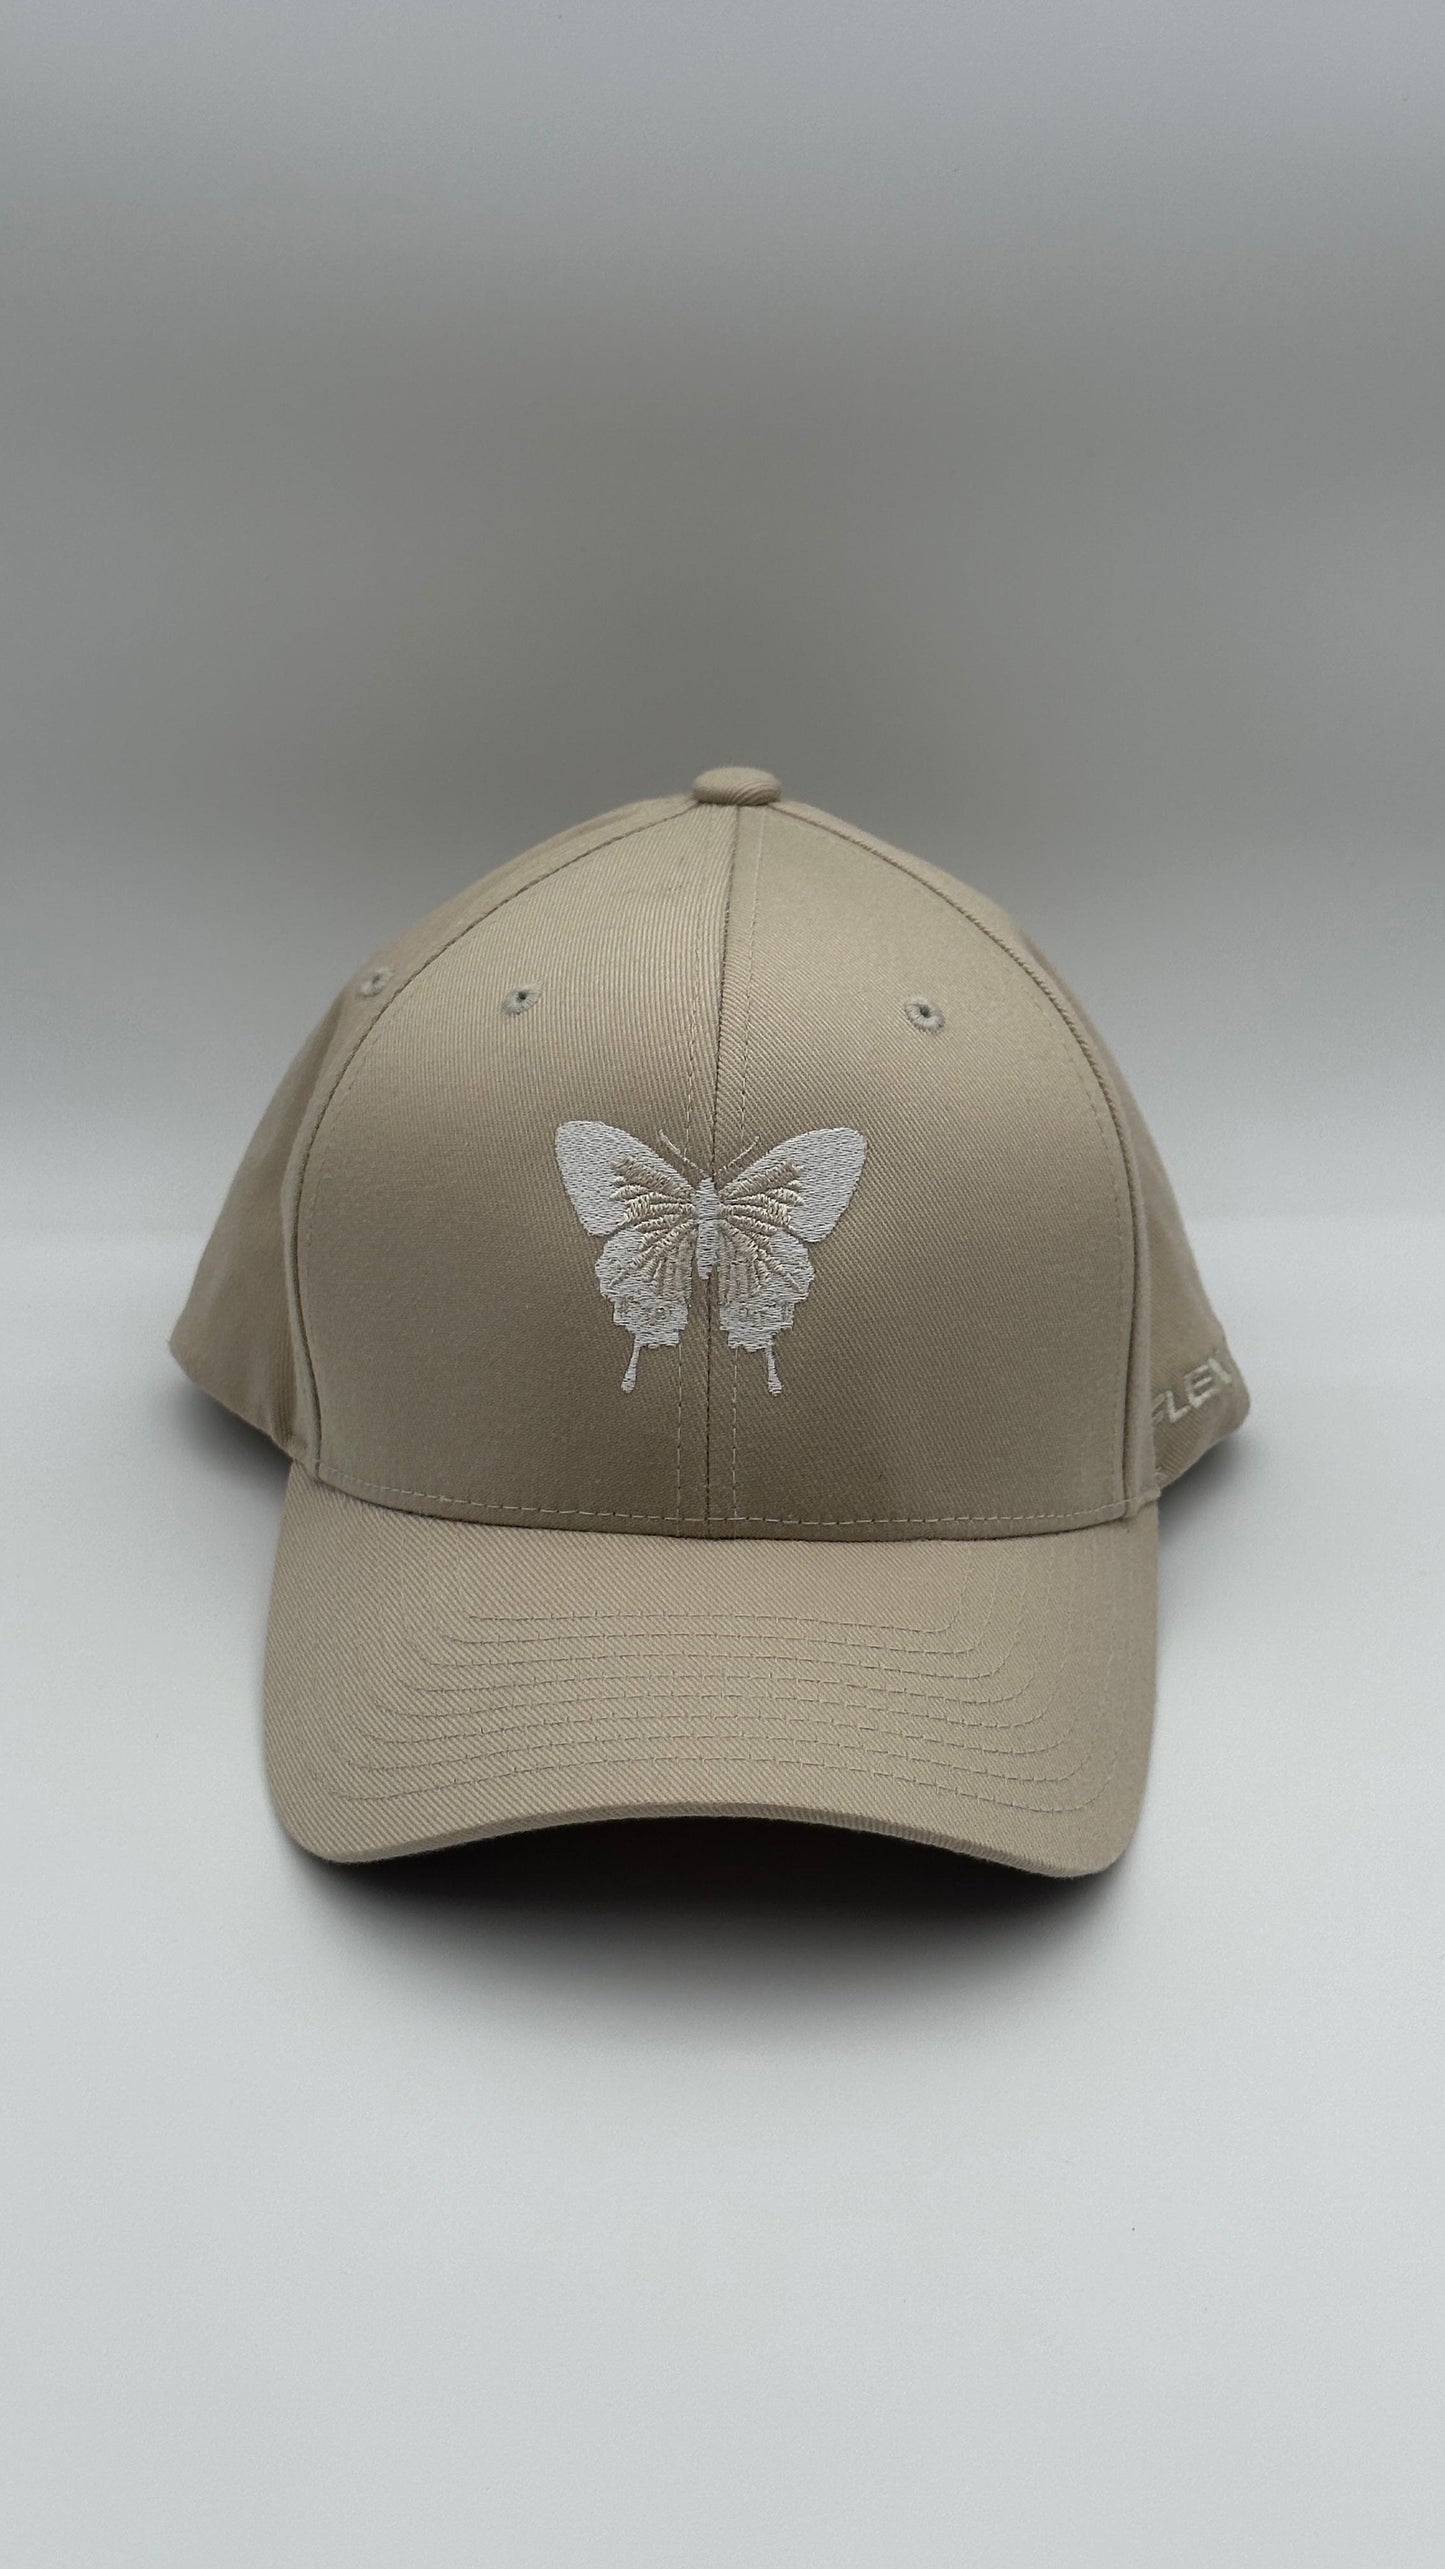 Butterfly Cap white on Brown